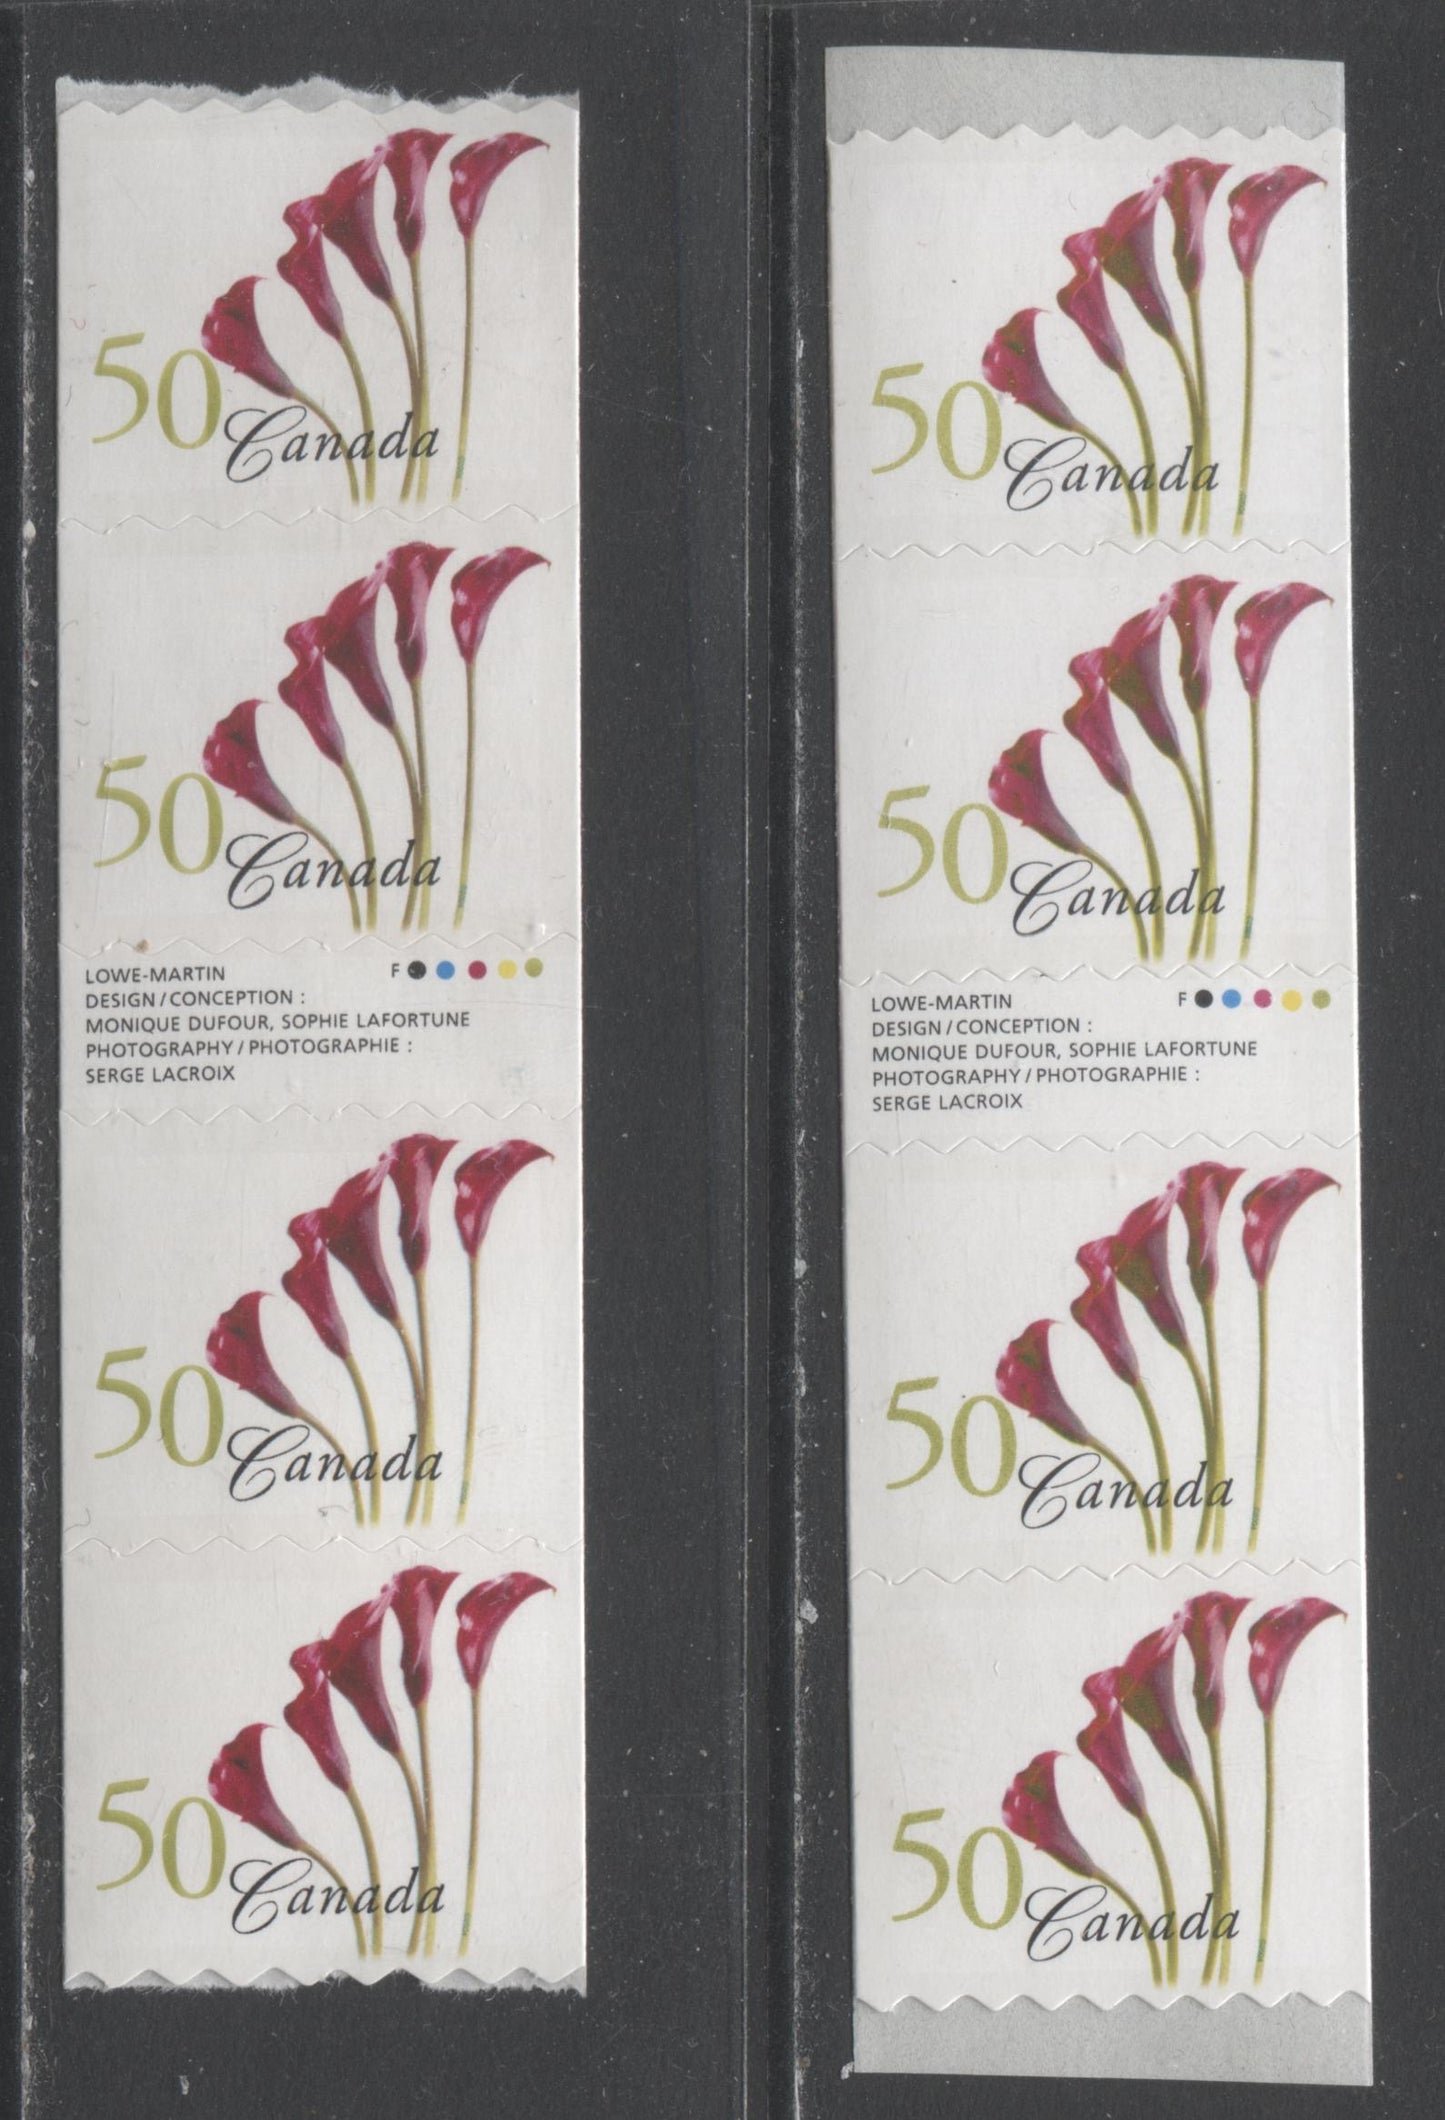 Lot 15 Canada #2072vi,2072ai 50c Multicolored Red Calla Lily, 2004 Flower Definitives (1) Coils Issue, 2 VFNH Gutter Strip Of 4 With Inscription Containing The "F" Over "O" of Lafortune. Both Die Cuts 6.25-8.90 and 6.45-7.05 Horiz. $12.50